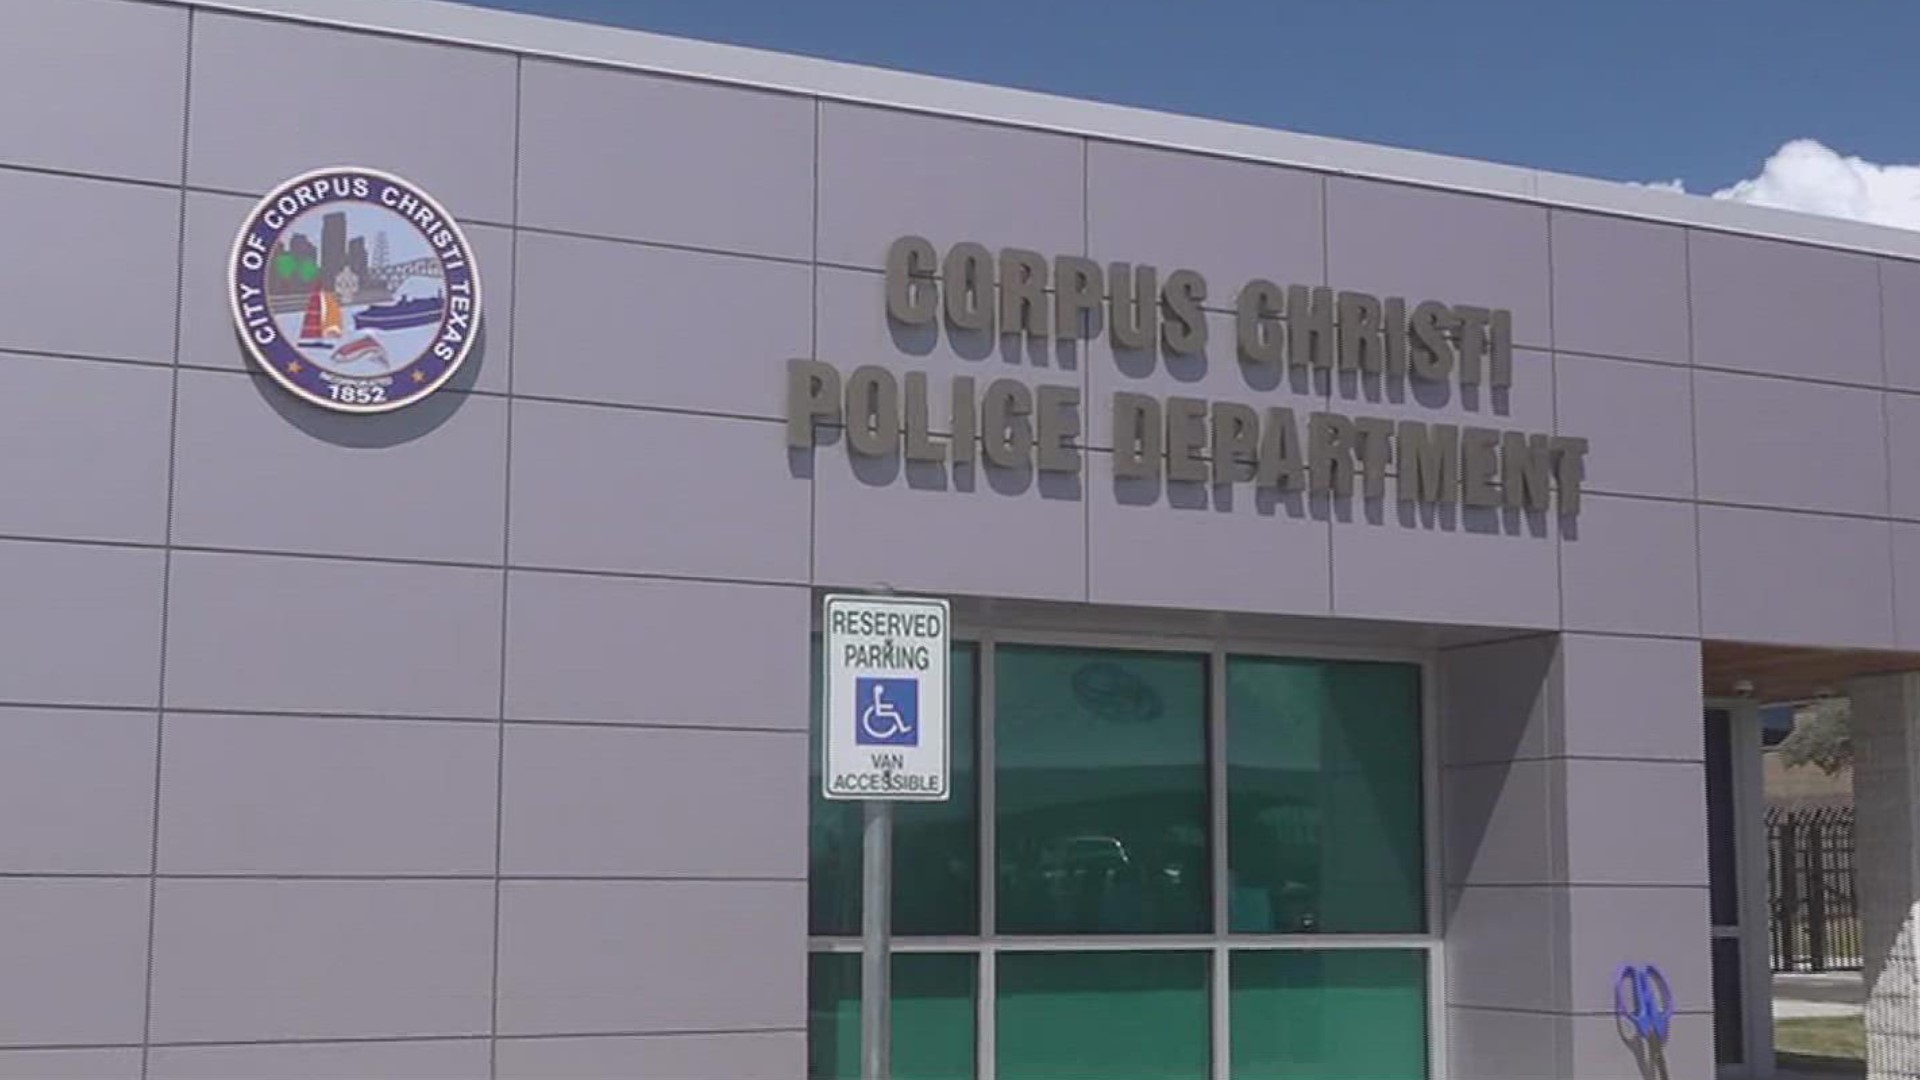 City officials say the buildings new look was designed not only to improve the work environment for officer but also to be inviting to the community.